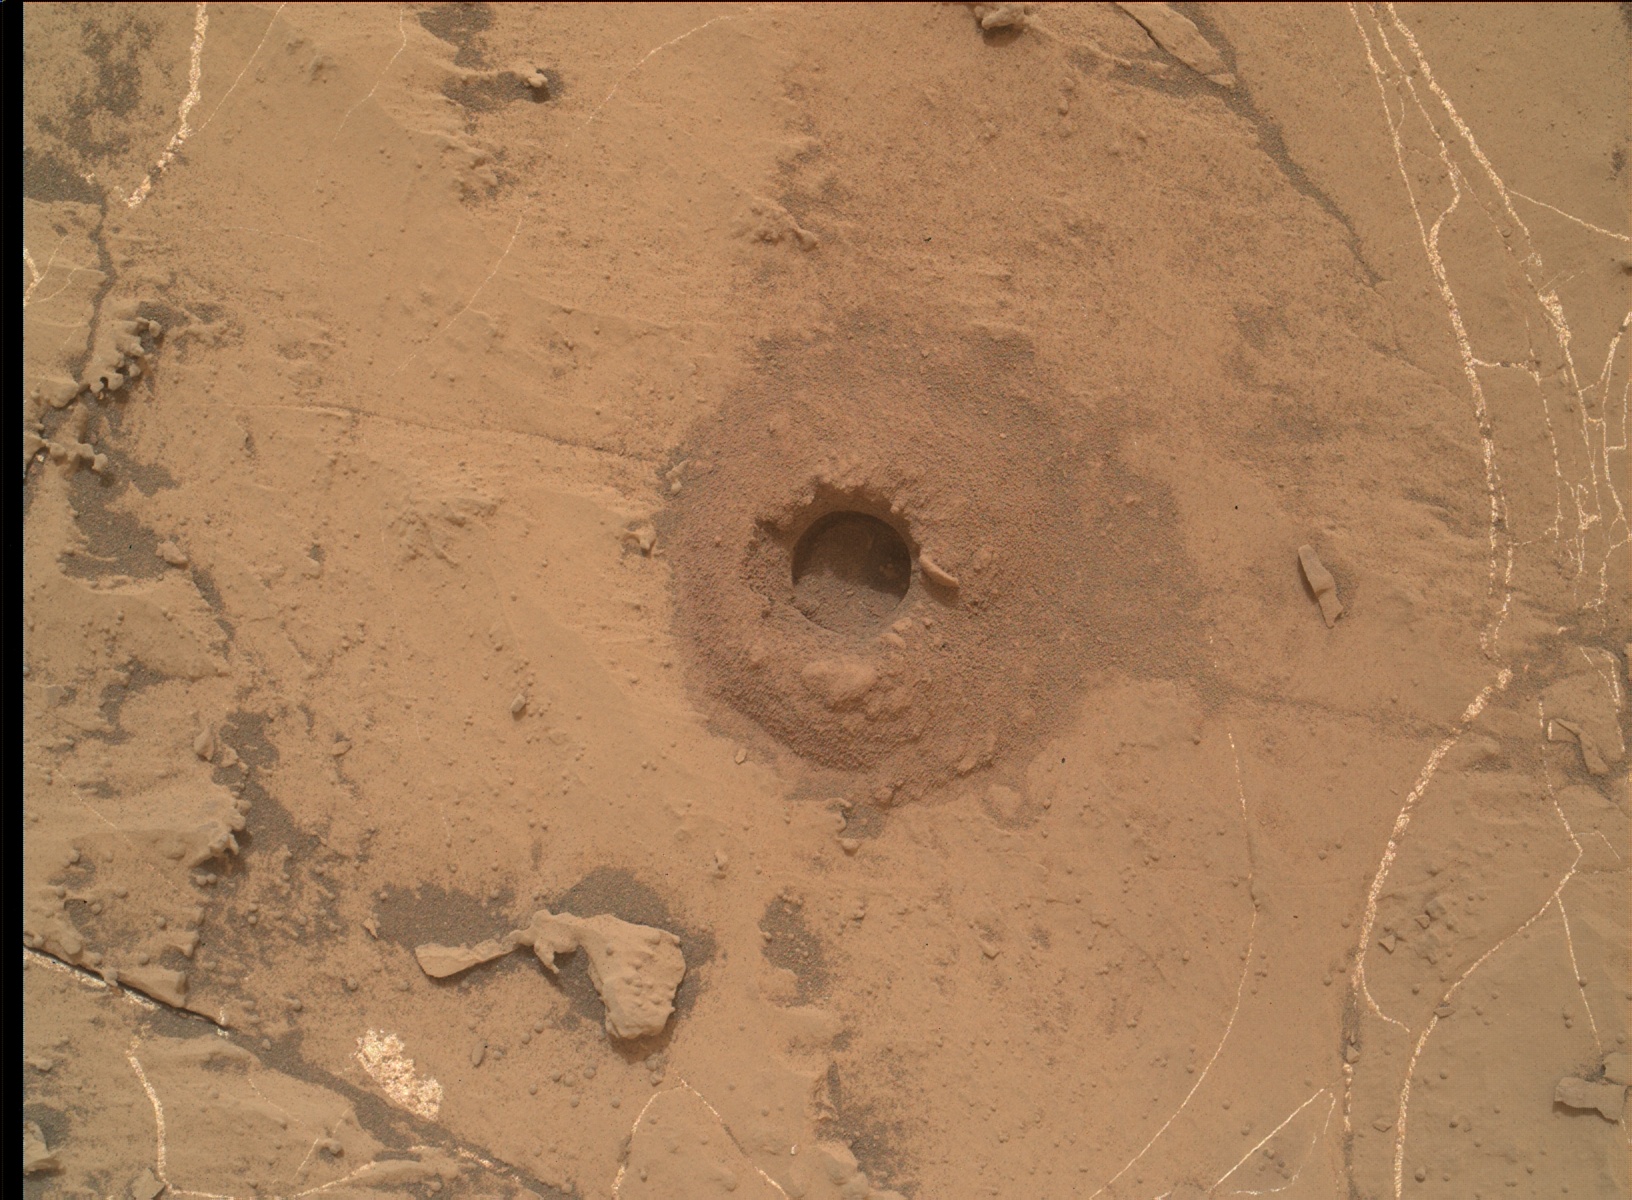 Nasa's Mars rover Curiosity acquired this image using its Mars Hand Lens Imager (MAHLI) on Sol 2154